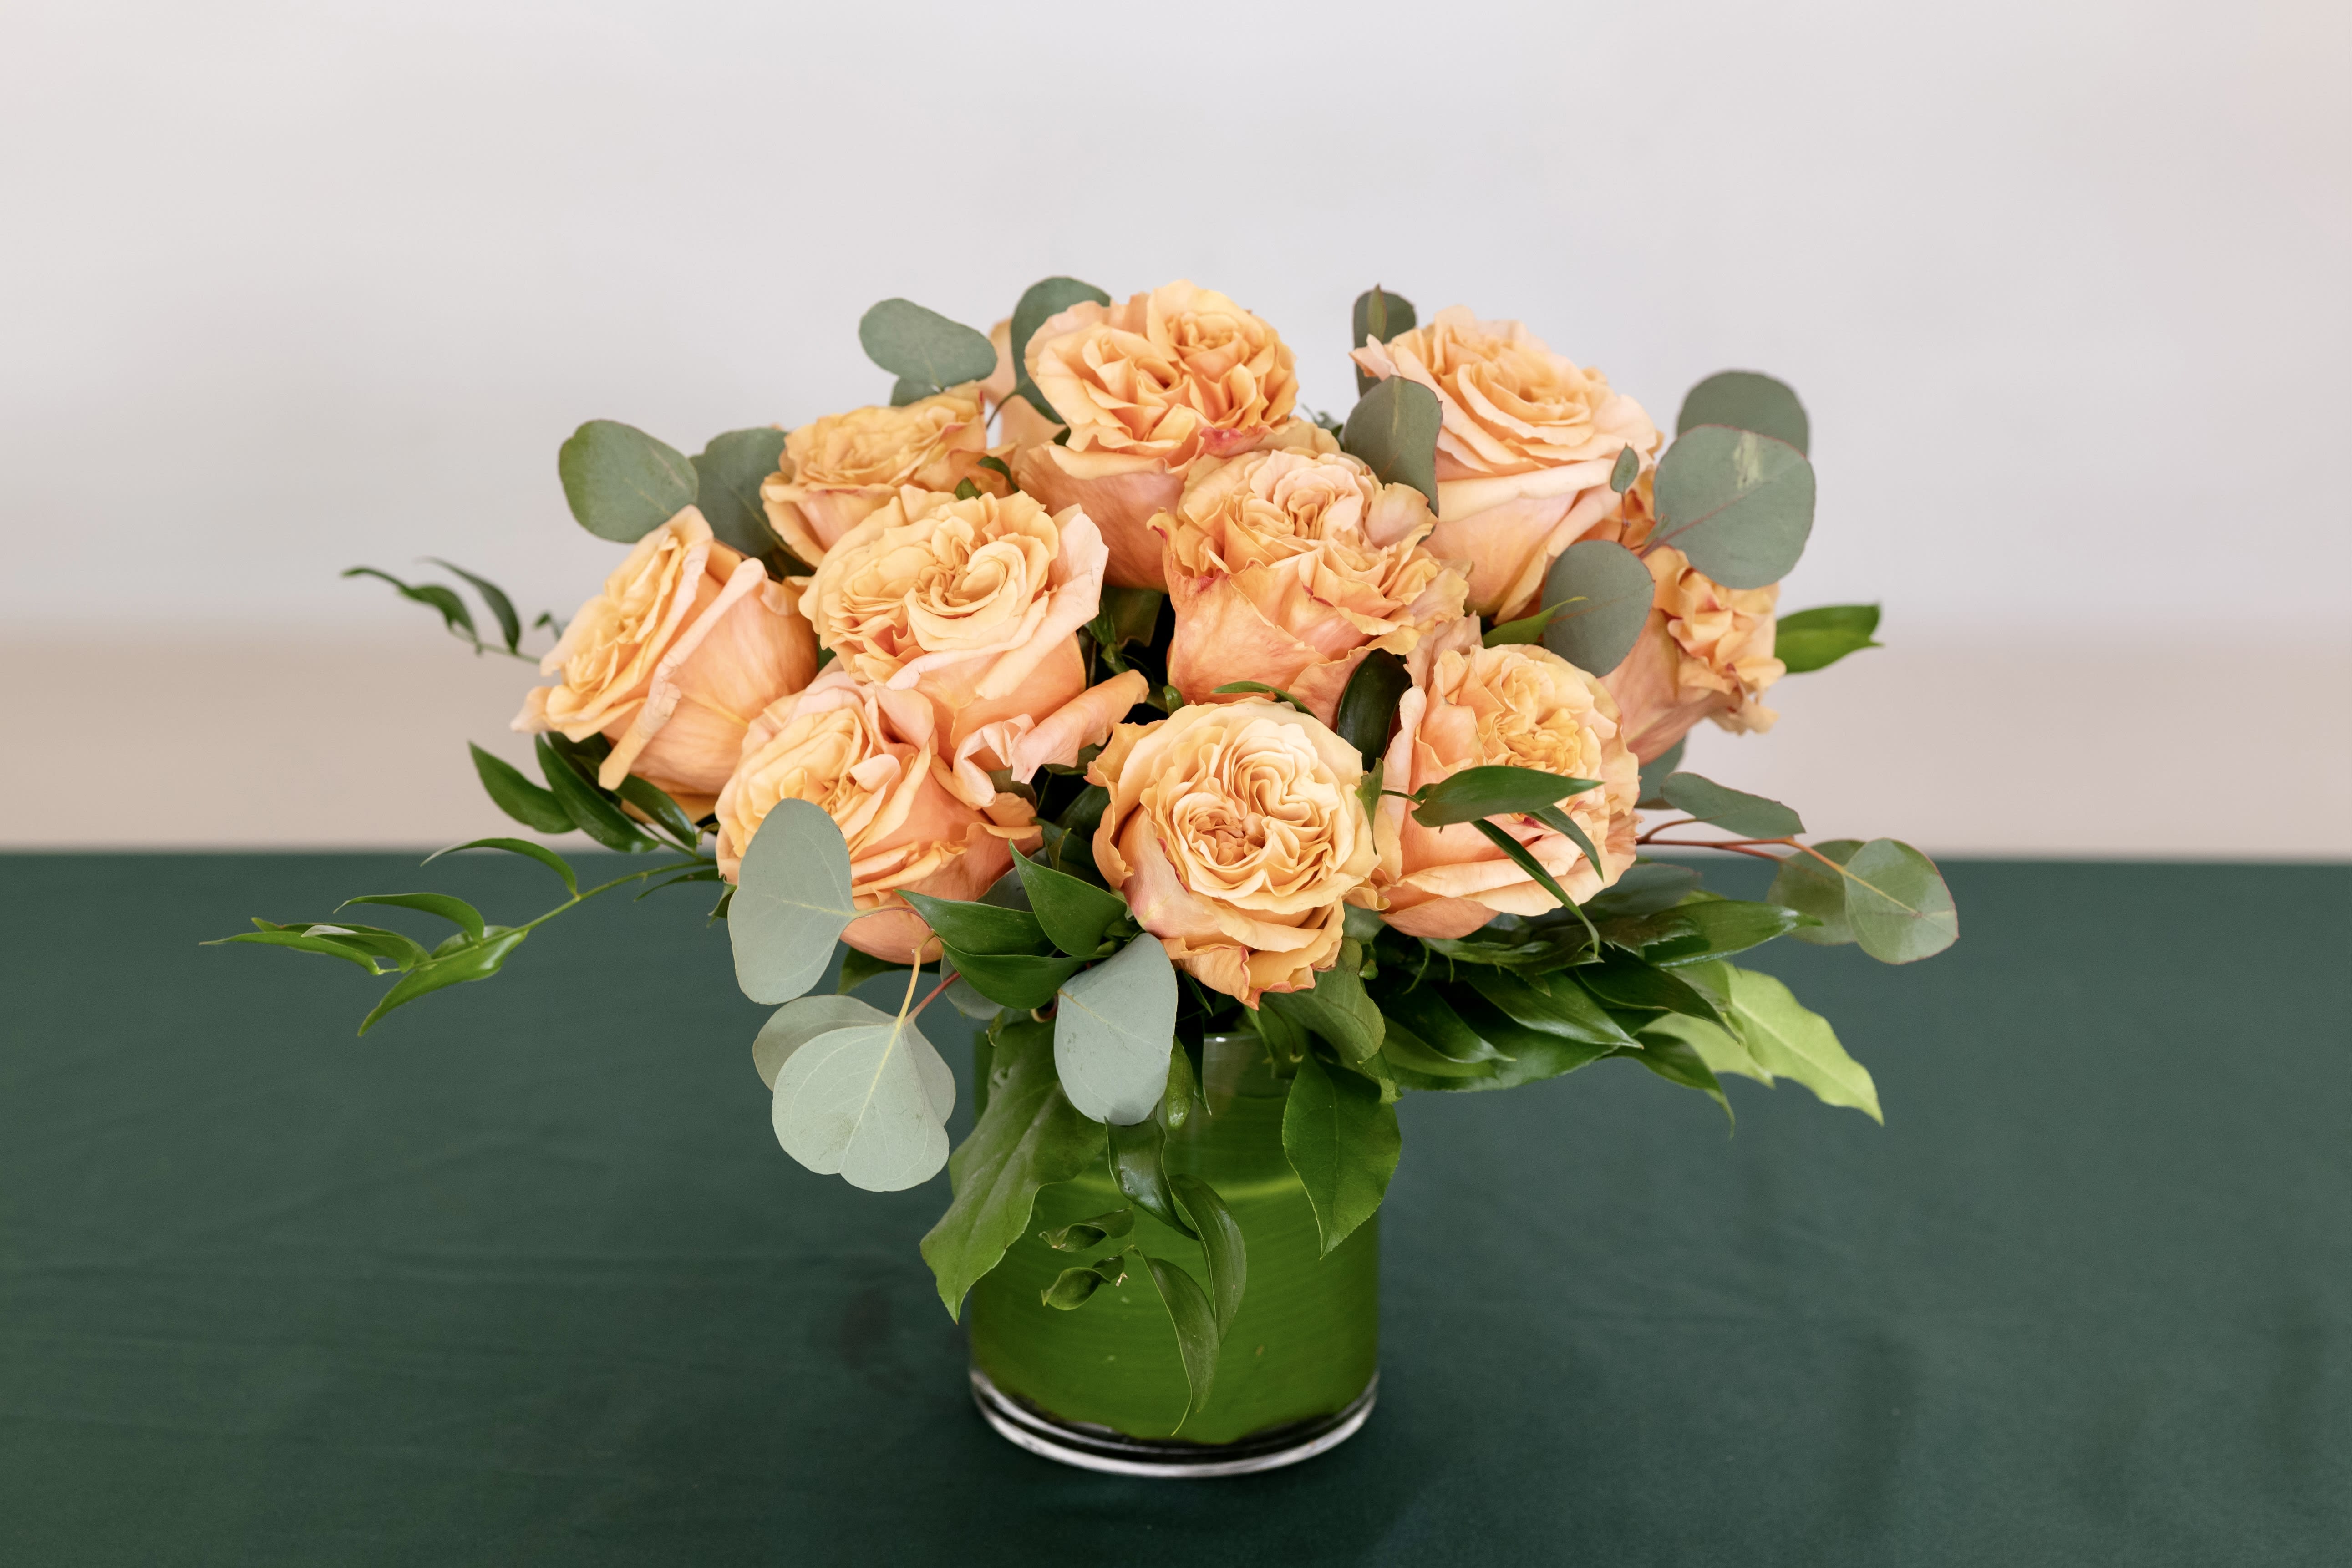 Peach Roses - One dozen peach roses in a low and lush design